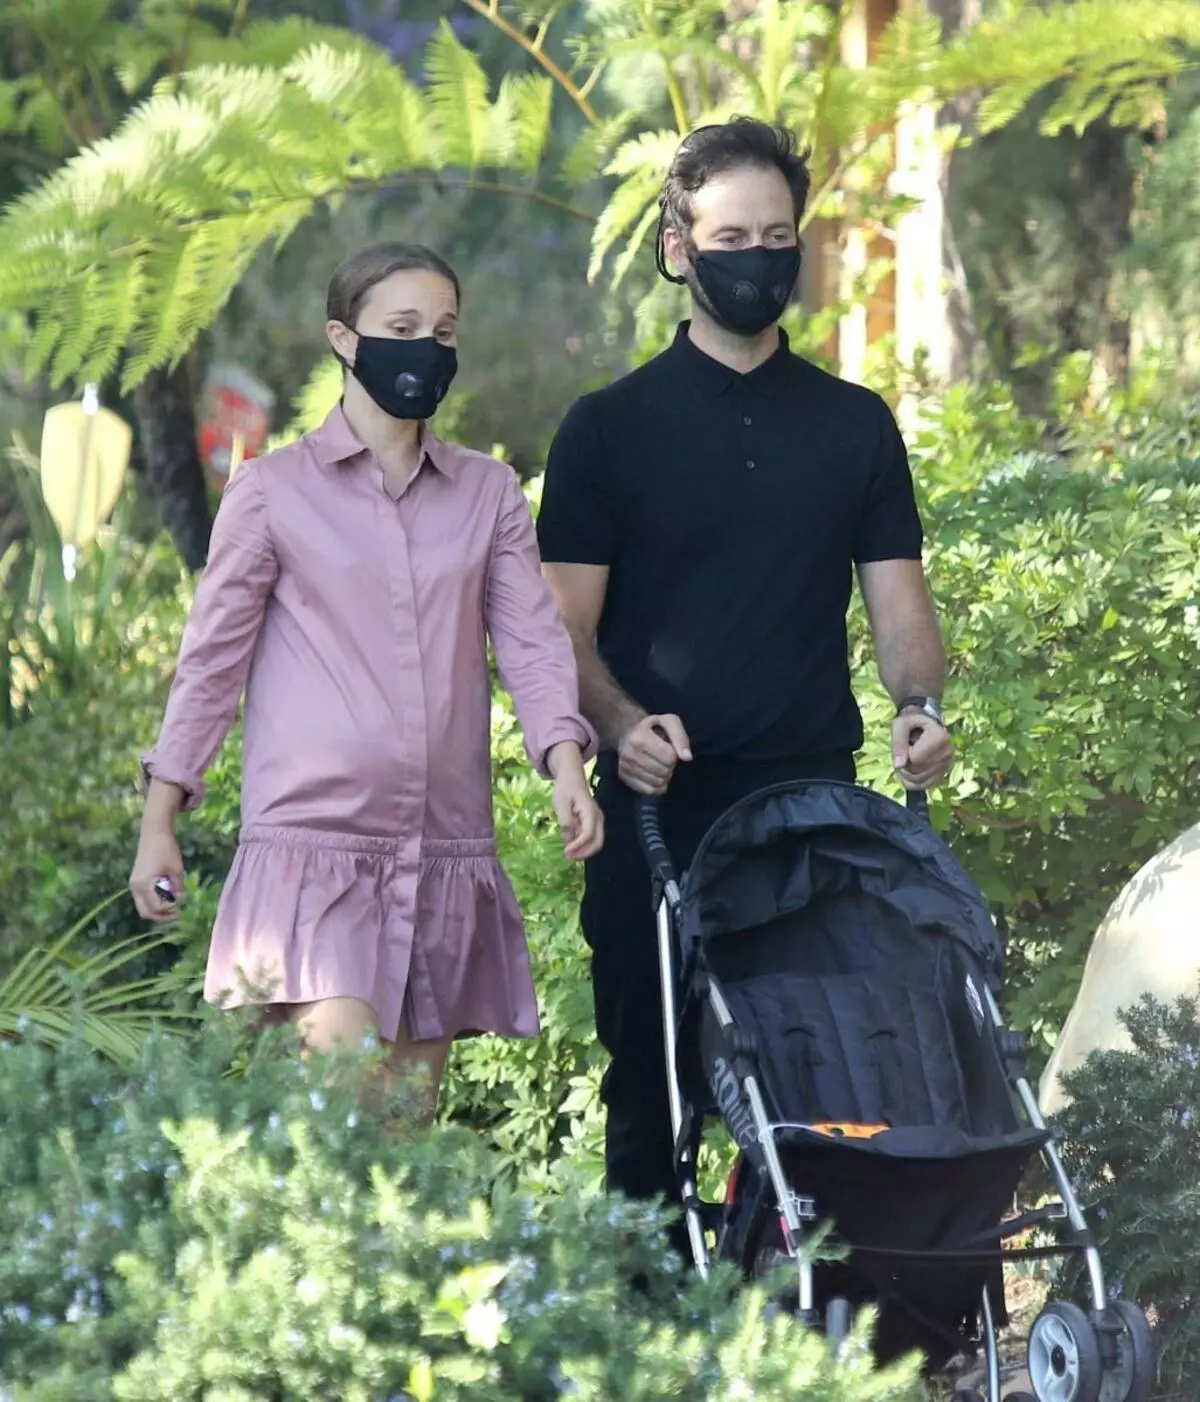 Natalie Portman suspected in the third pregnancy because of the photo paparazzi 78933_1